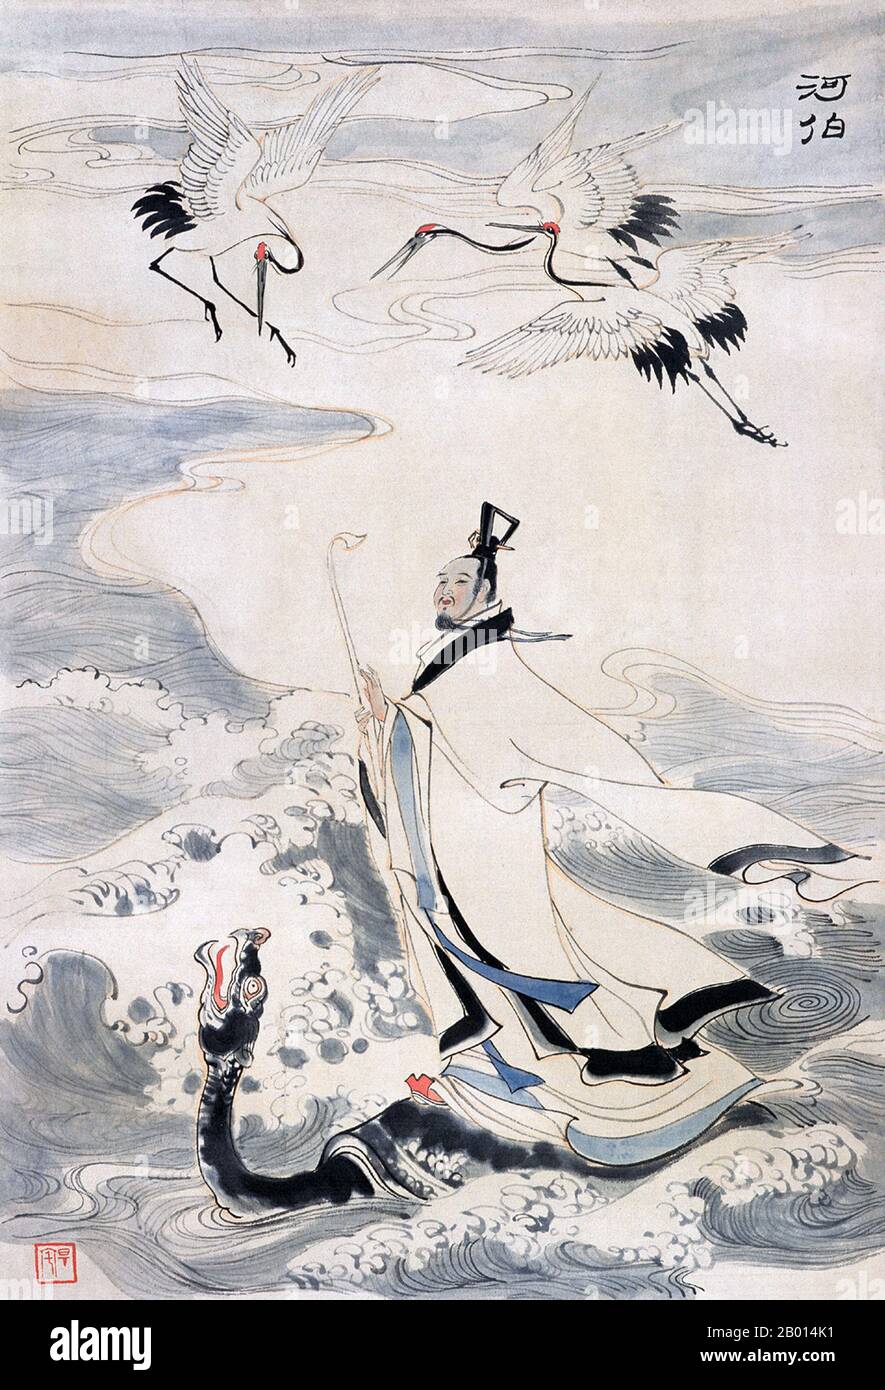 China: Yu the Great (c. 2123-2025 BCE), legendary founder of the Xia Dynasty (2205-1766 BCE). Hanging scroll painting, c. 19th century.  Da Yu, commonly known as Yu the Great, was a mythical king of ancient China, best remembered for teaching the people techniques to tame rivers and lakes during The Great Flood. He founded the Xia Dynasty, which was the first dynasty in traditional Chinese historiography. His reign predates the oldest-known written records in China, and therefore there is controversy and debate about whether he truly existed. Stock Photo